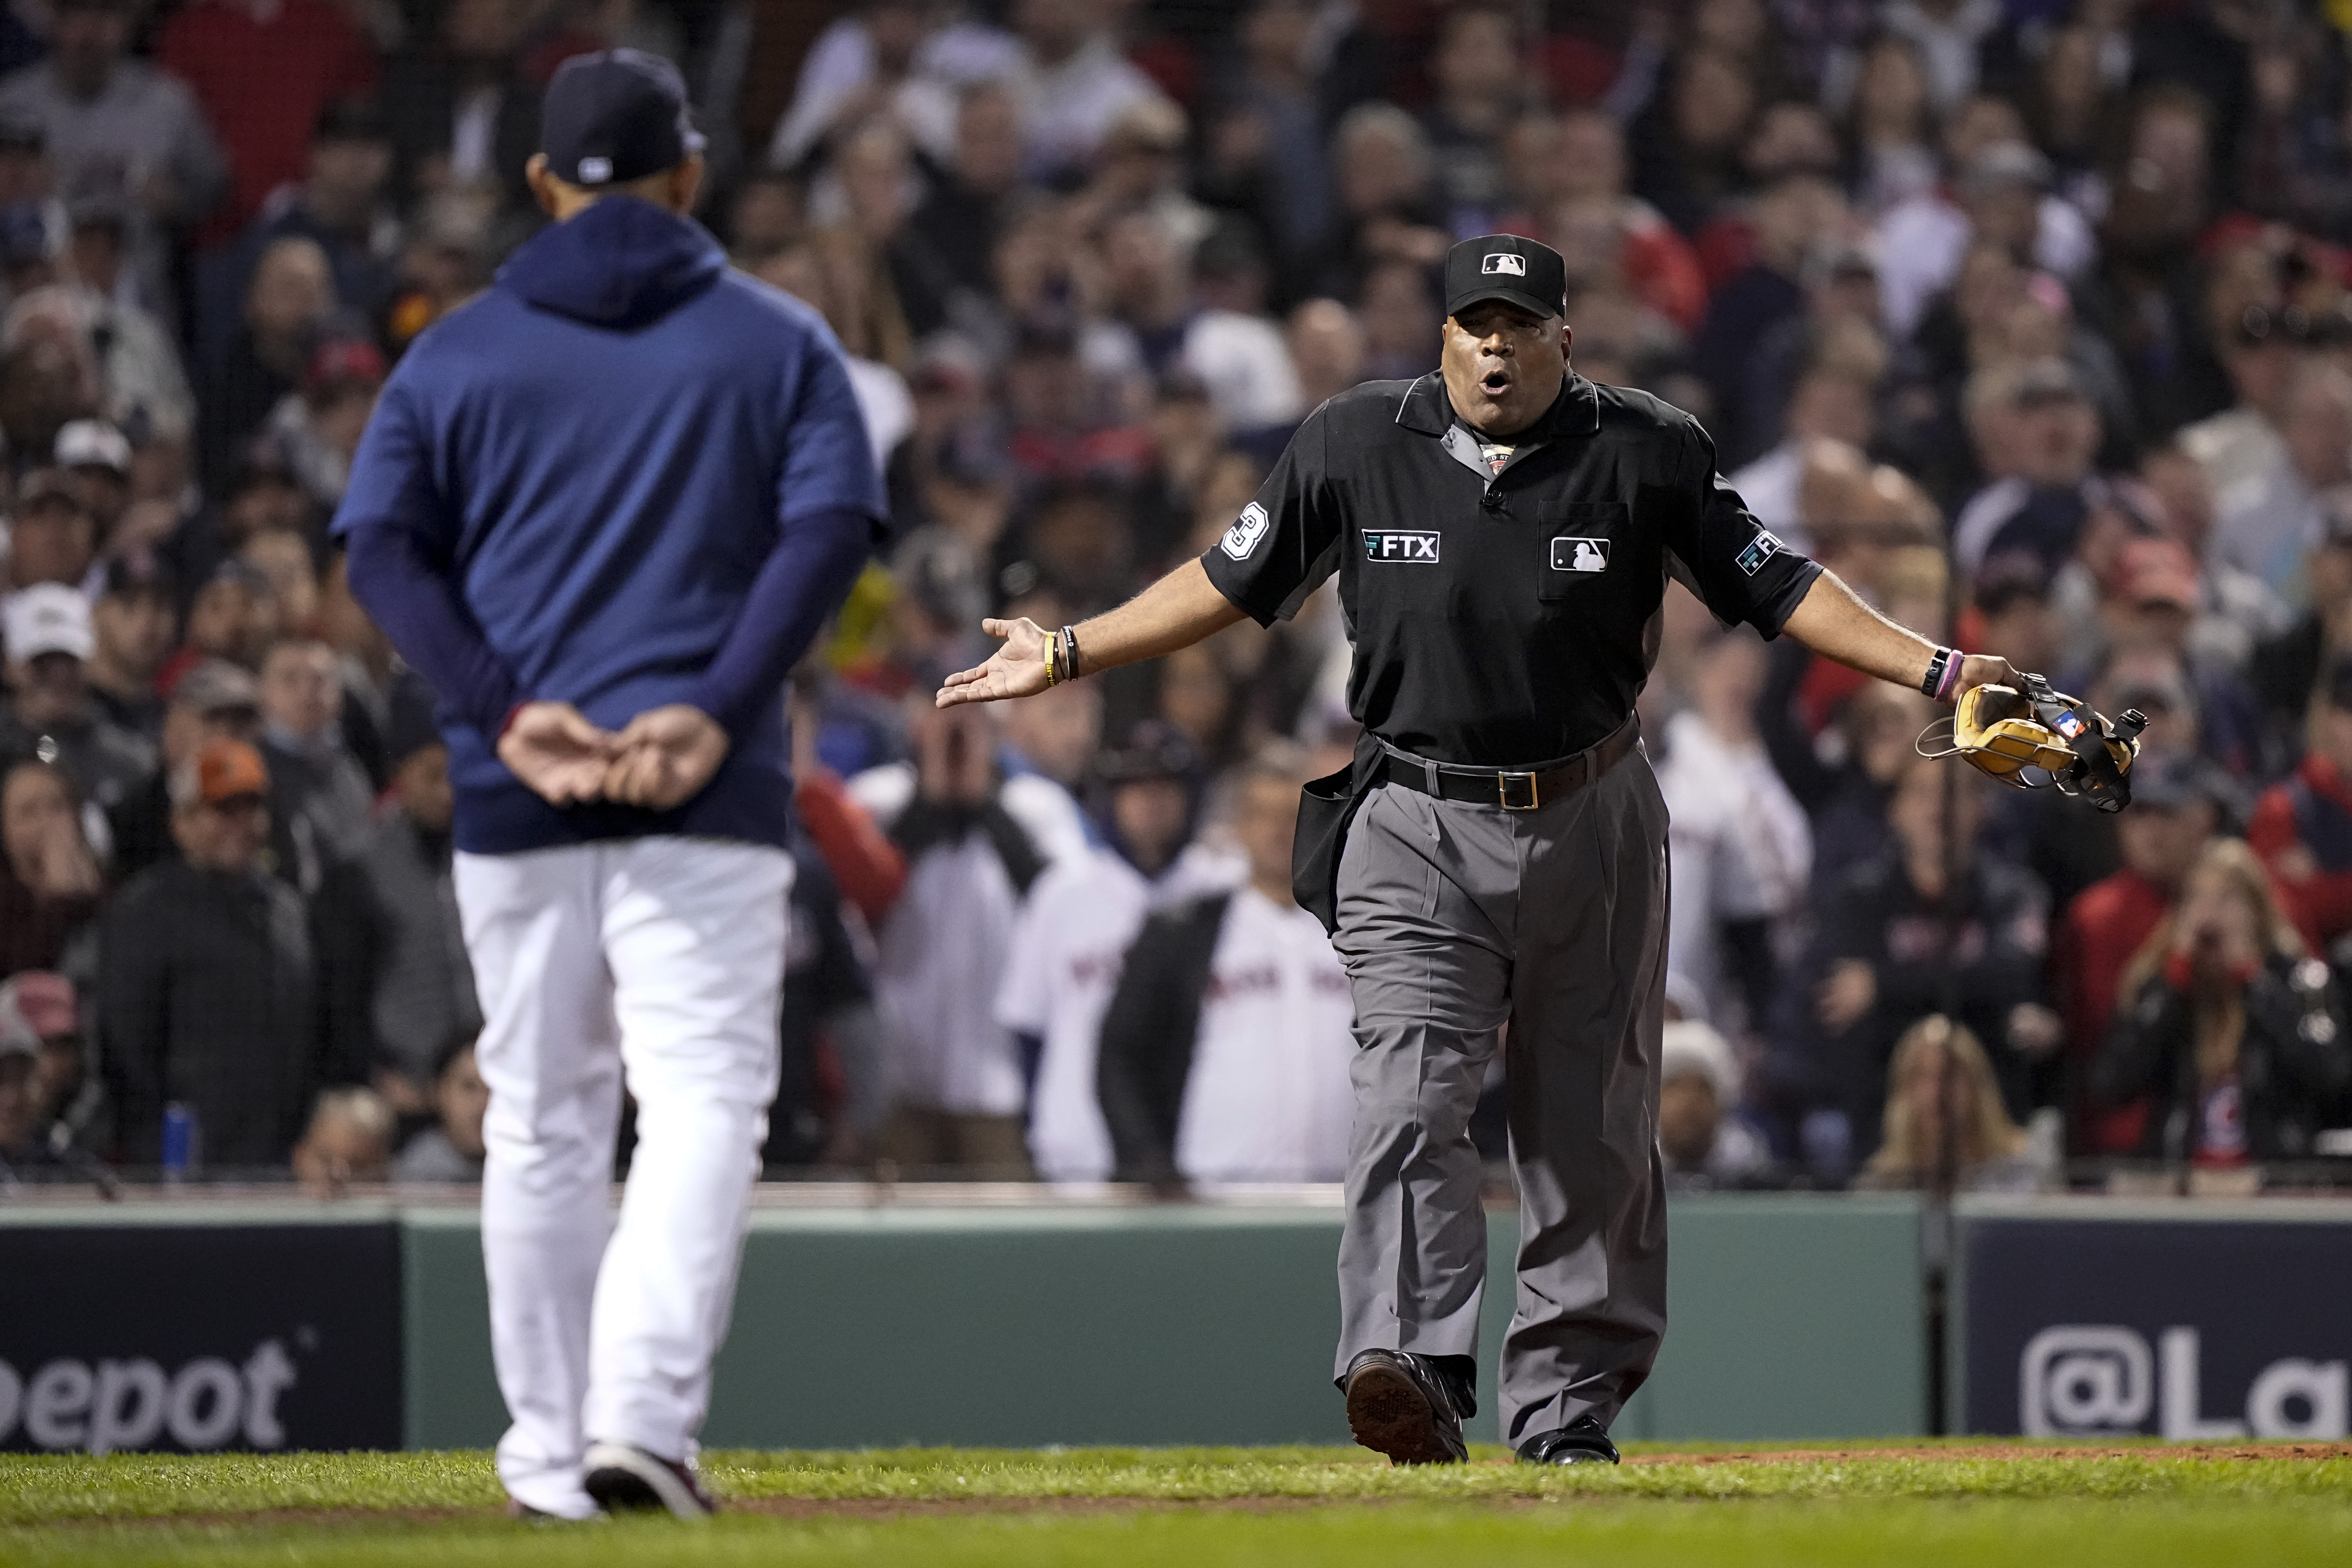 MLB playoffs: Astros-Red Sox ALCS turns on bad call by umpire Laz